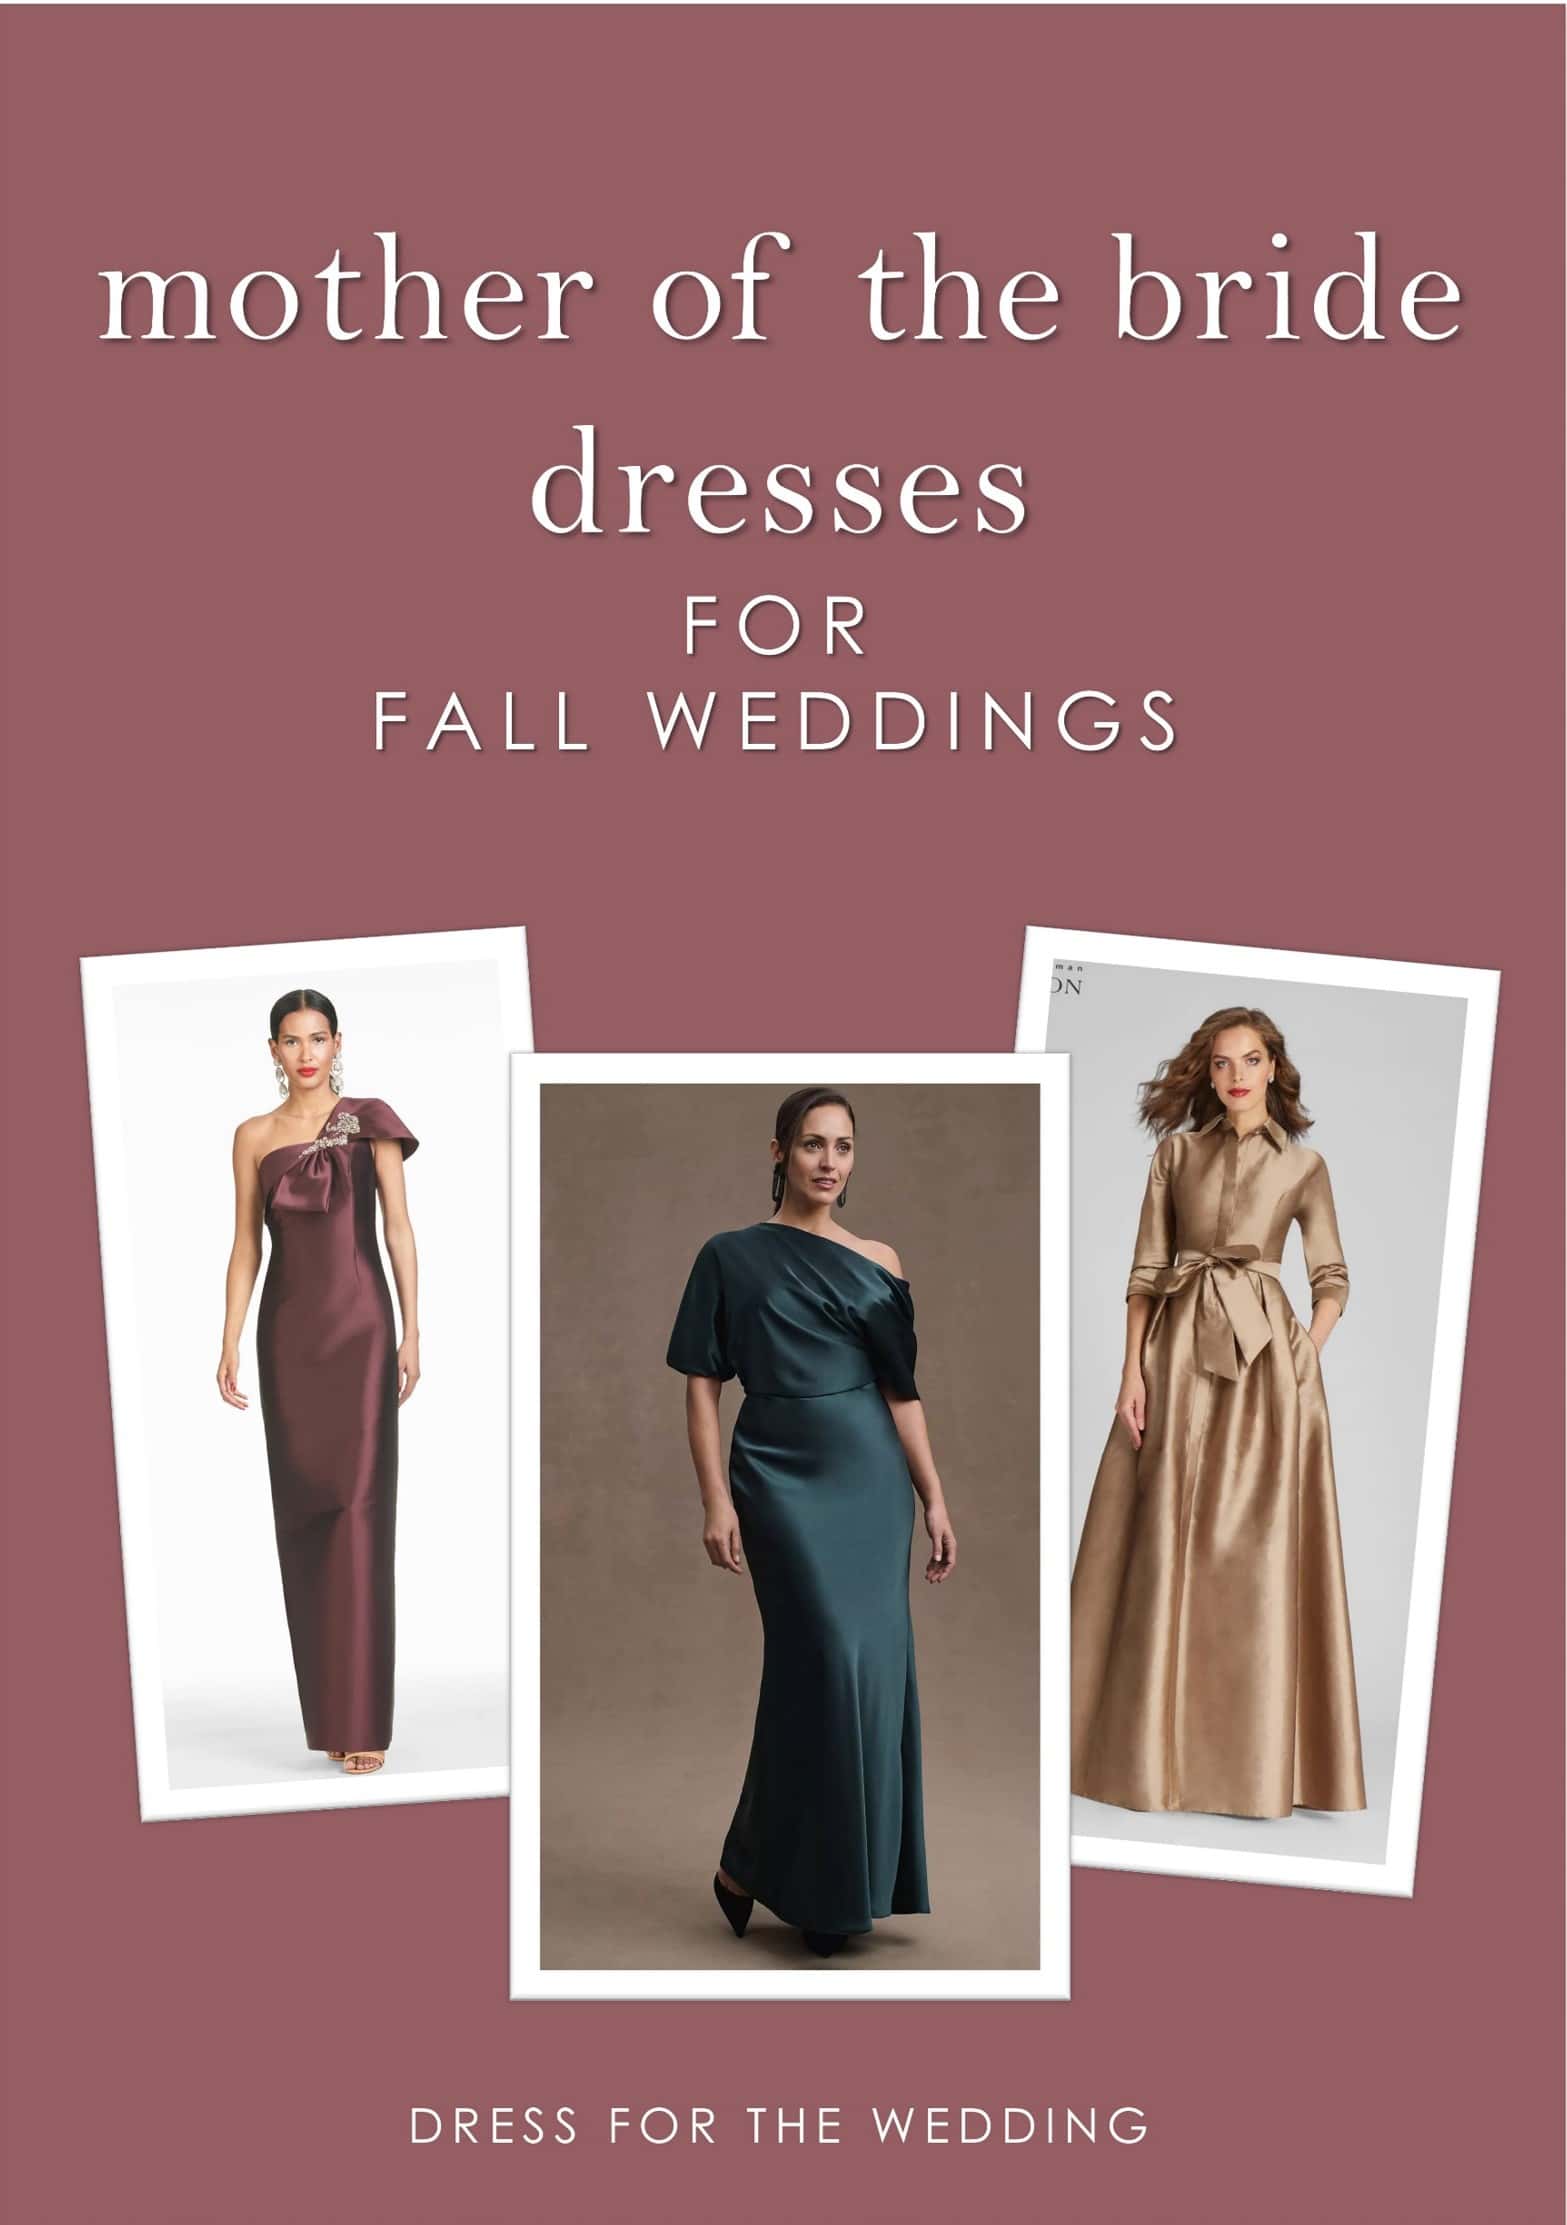 Style Tips For How to Dress as a Modern Mother of the Bride